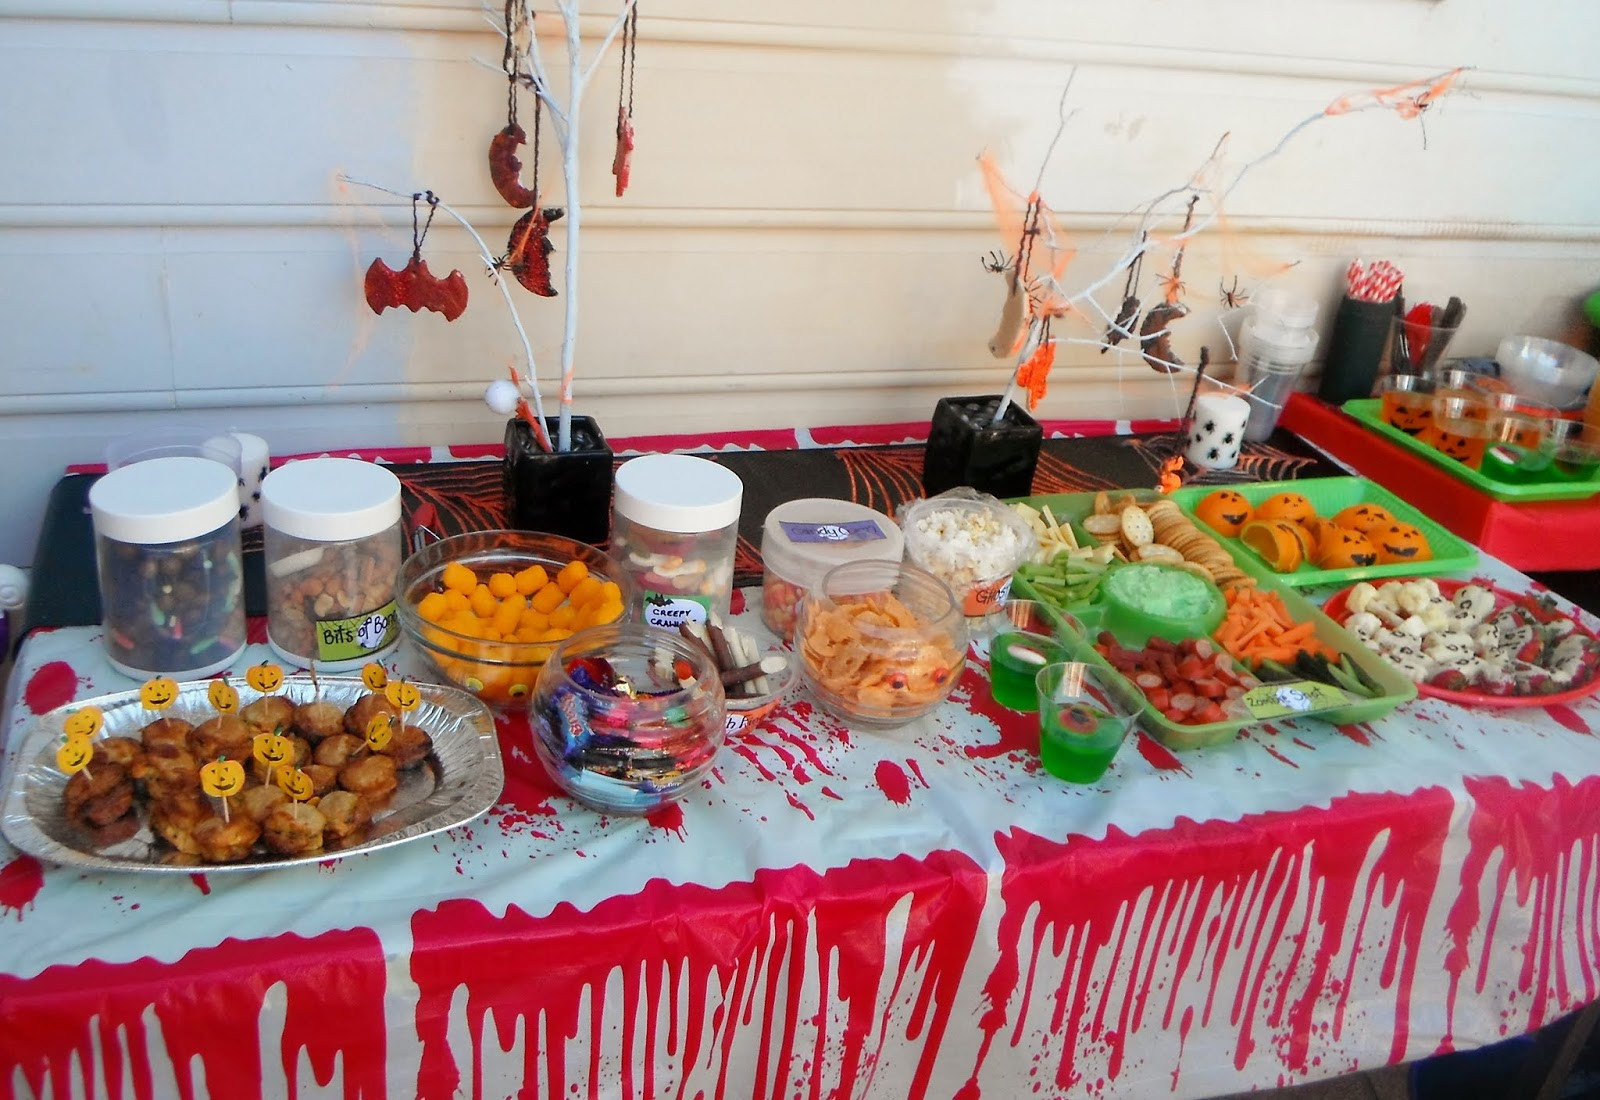 Food Party Ideas For Adults
 Adventures at home with Mum Halloween Party Food